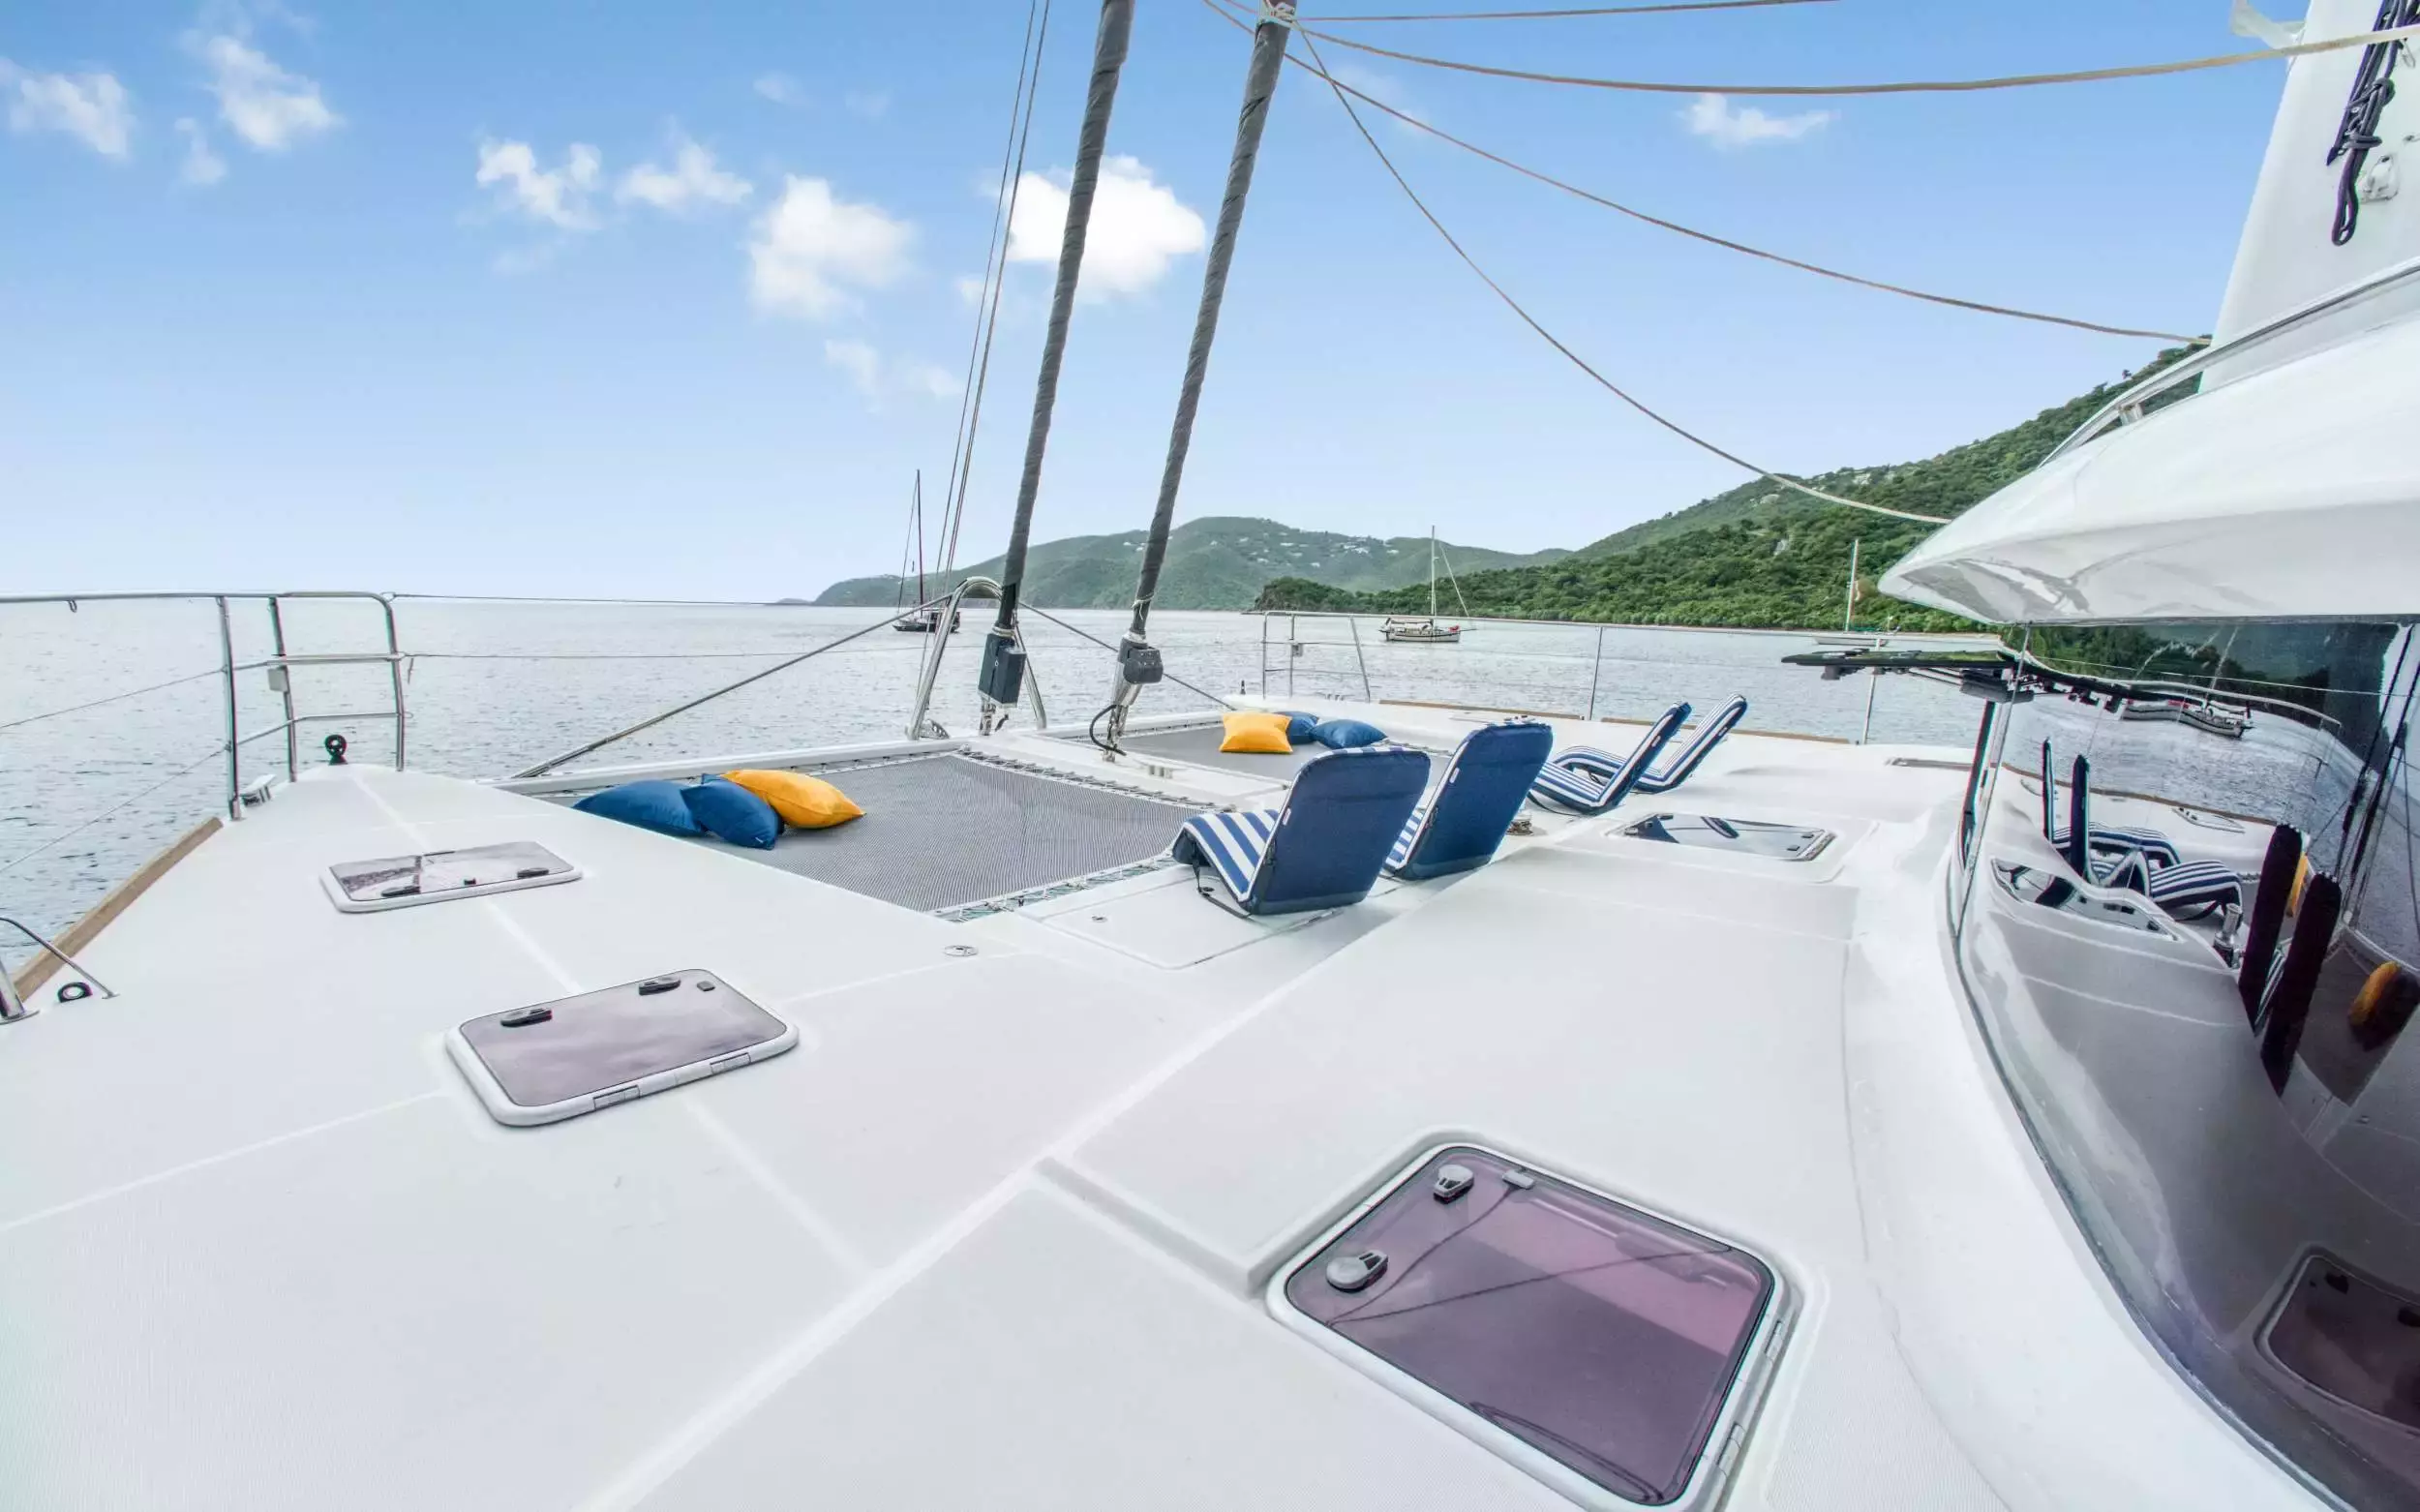 Valentina by Lagoon - Special Offer for a private Sailing Catamaran Rental in Bequia with a crew